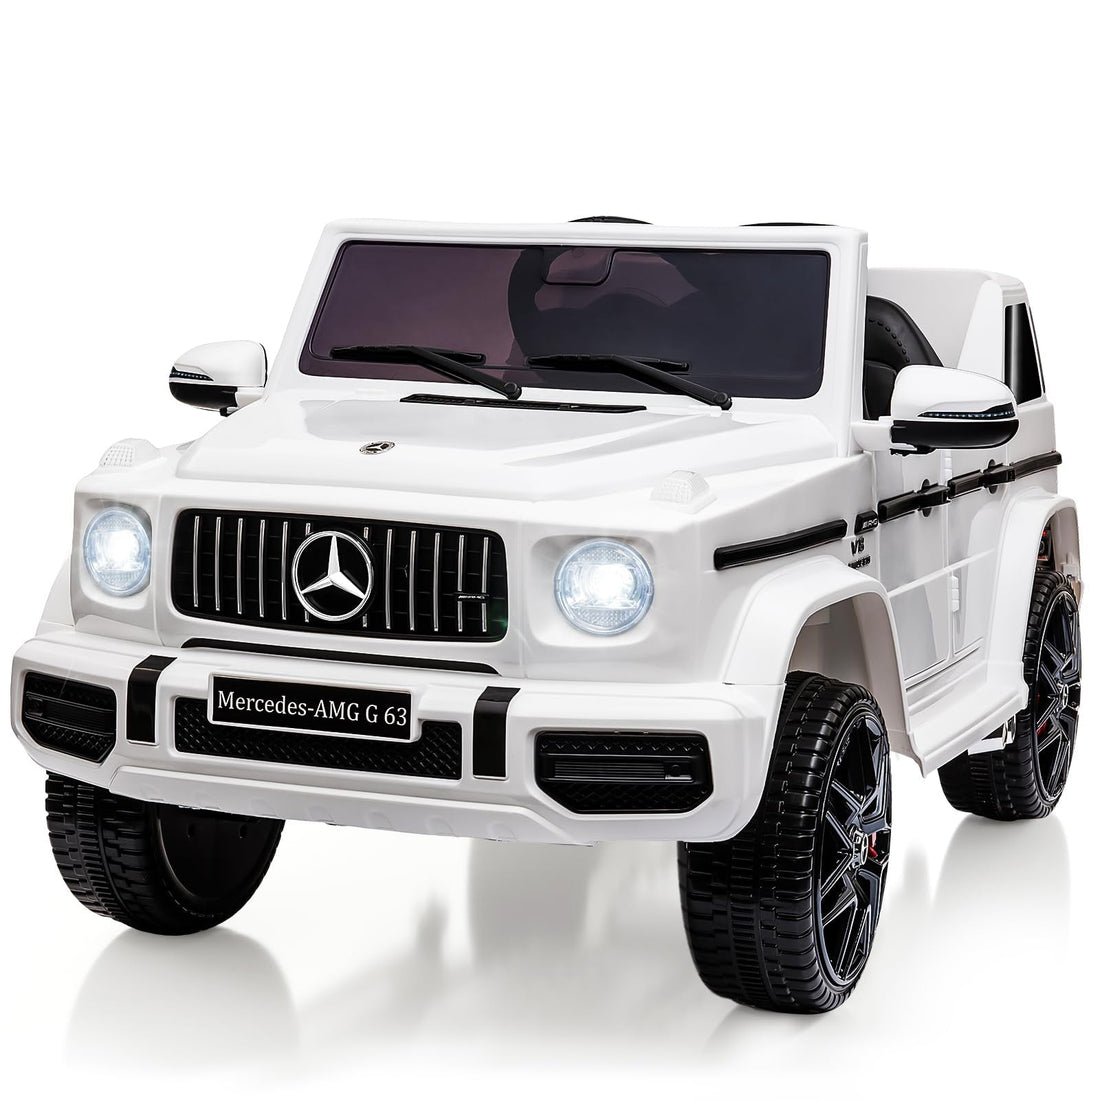 12V Kids Ride on Car, Licensed Mercedes Benz G63 Electric Car w/Remote Control, Music, Spring Suspension, LED Light, Bluetooth, Horn, AUX, Safety Lock Battery Powered Electric Vehicle